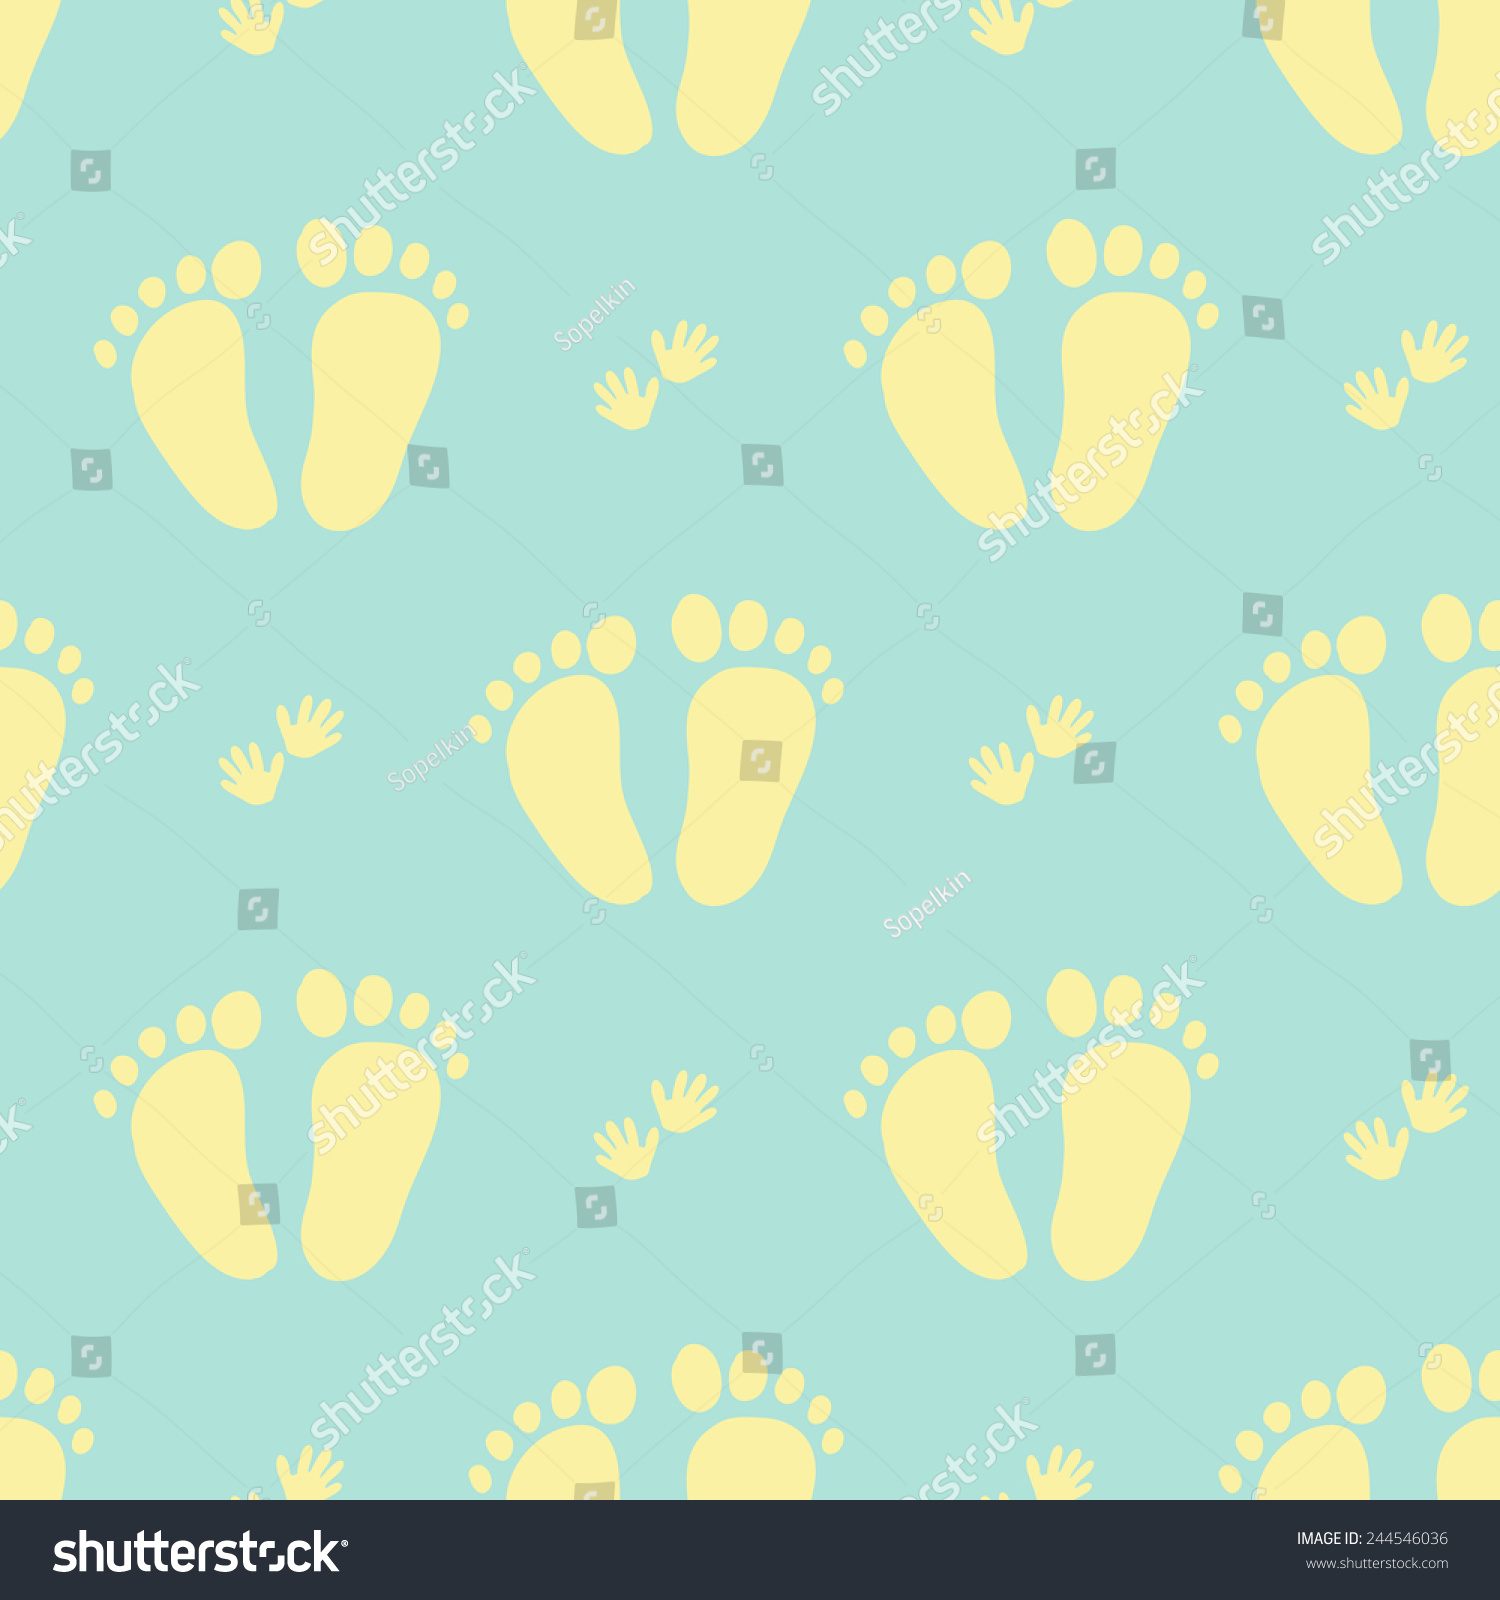 Funny Cute New Born Wele Baby Stock Vector Royalty